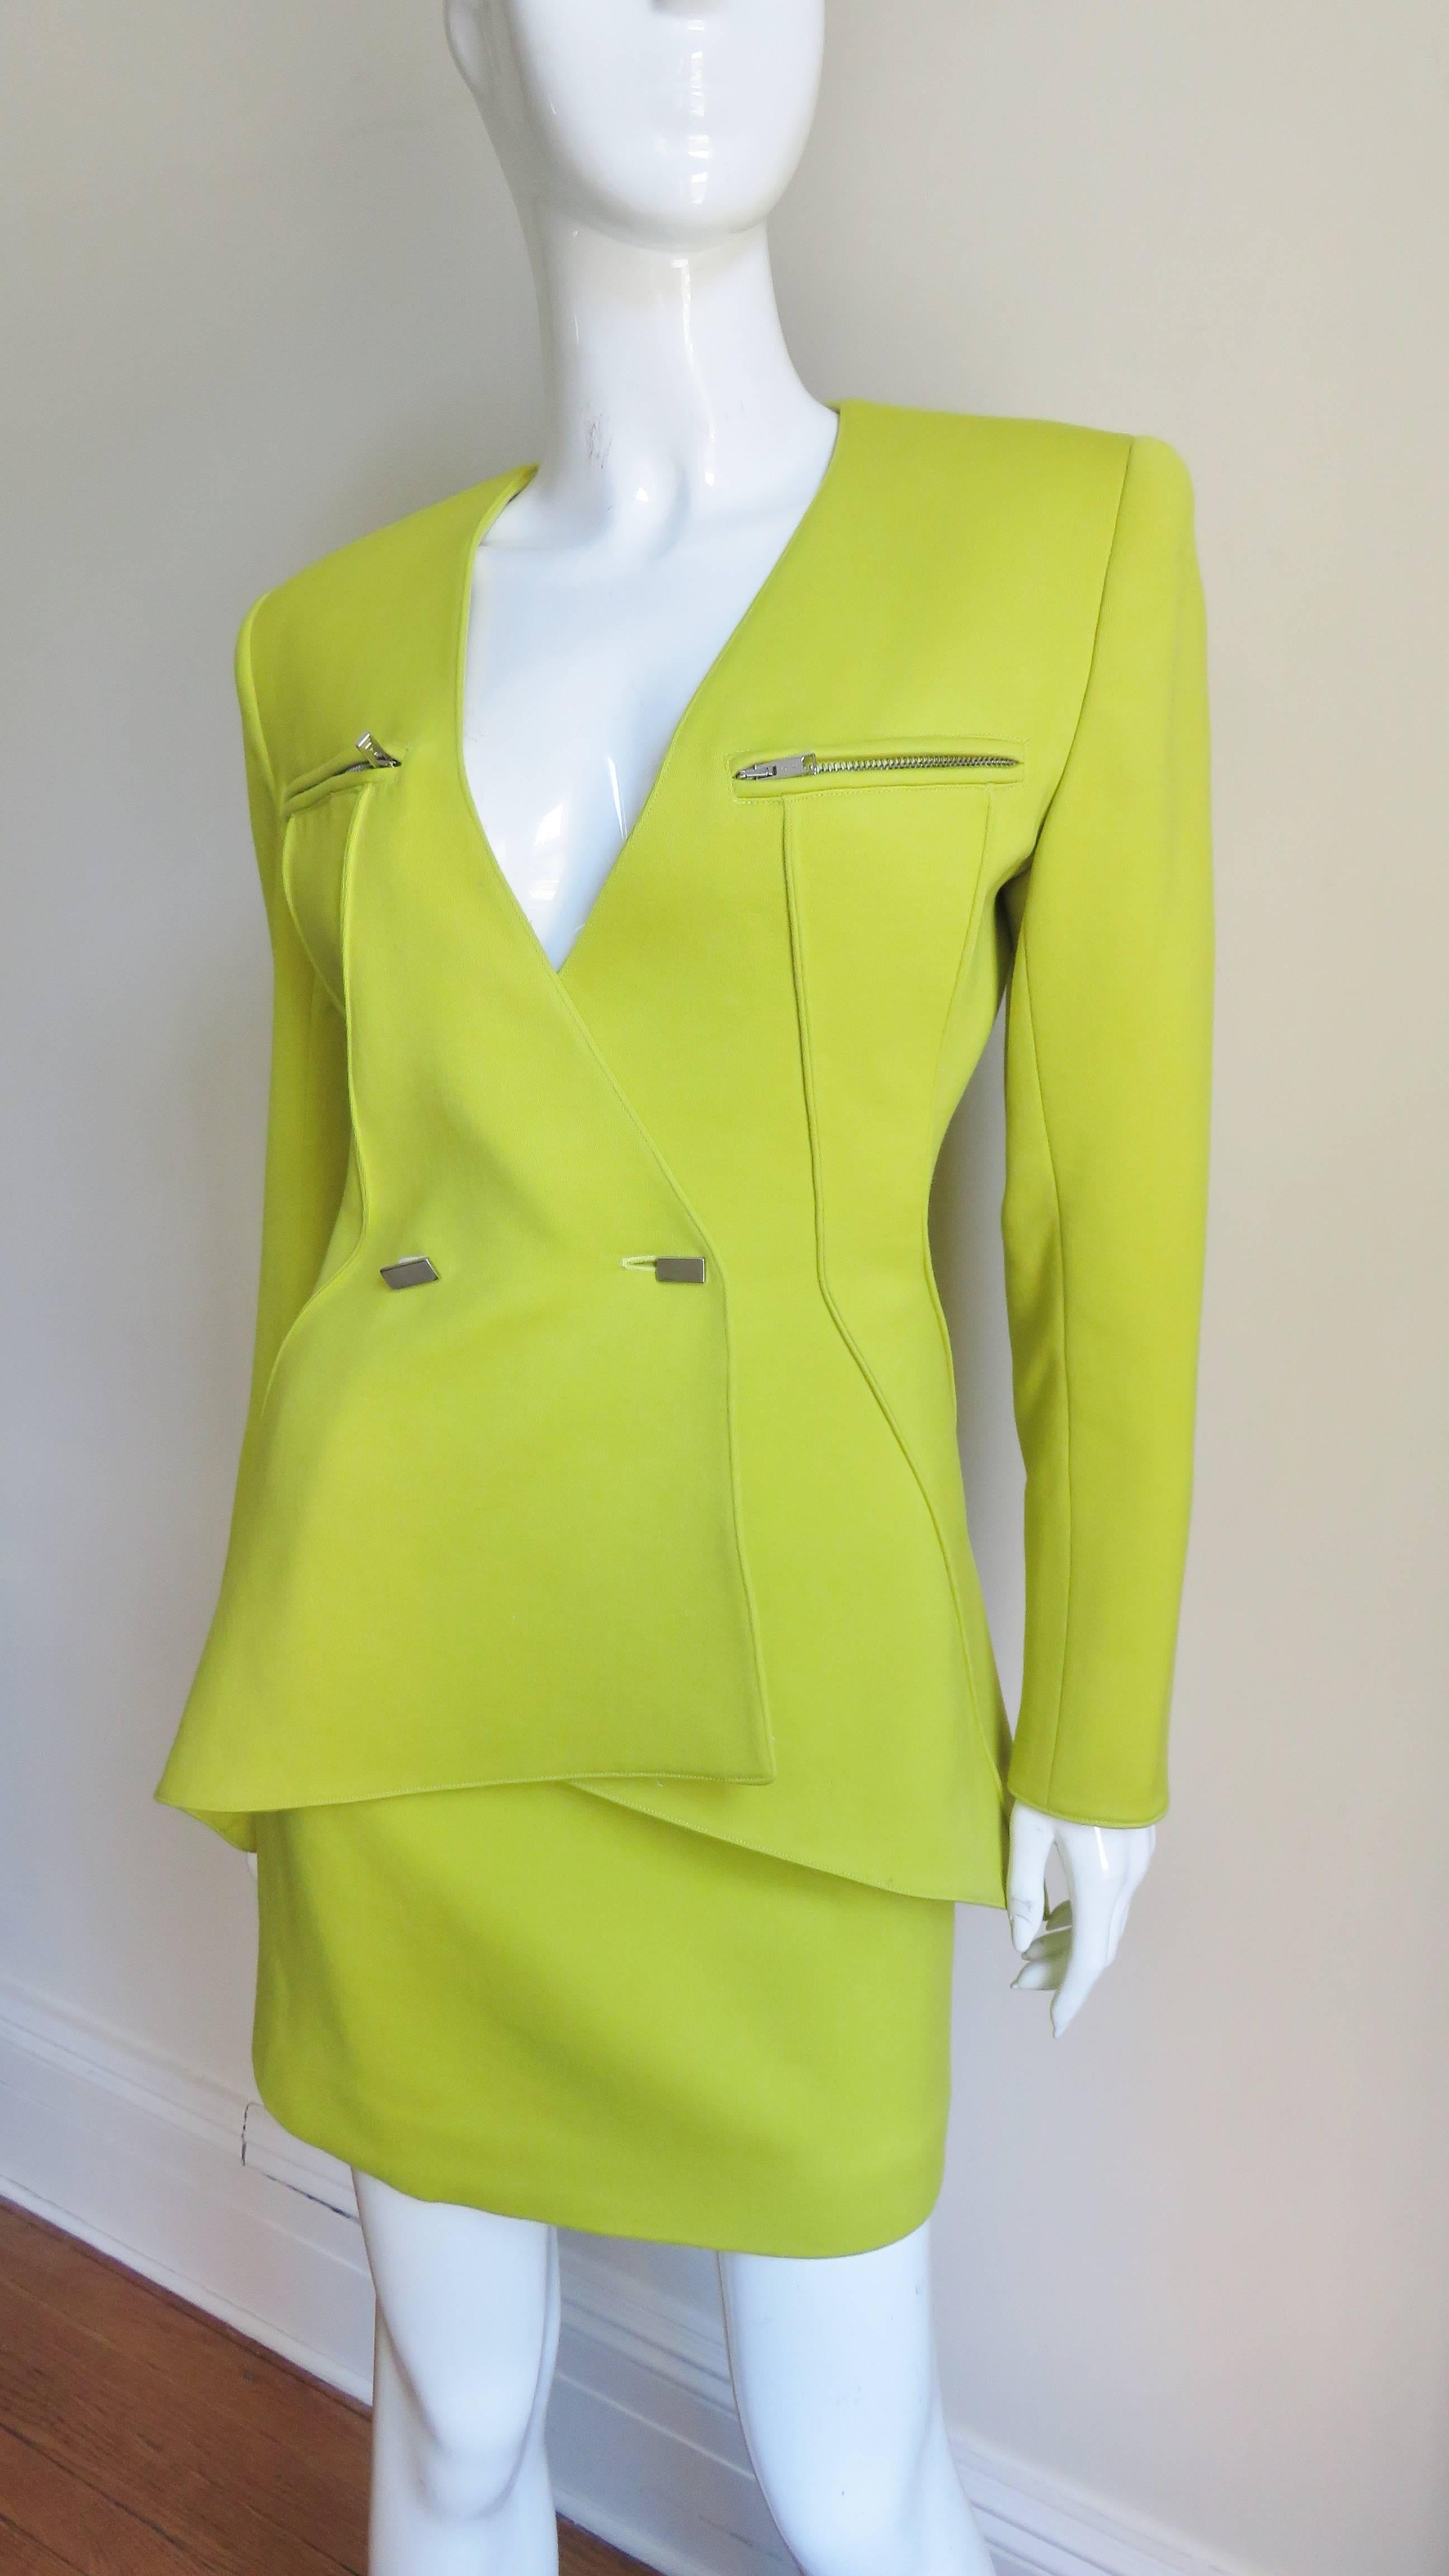 Green  Claude Montana New Neon Futuristic Skirt Suit A/W 1991 For Sale